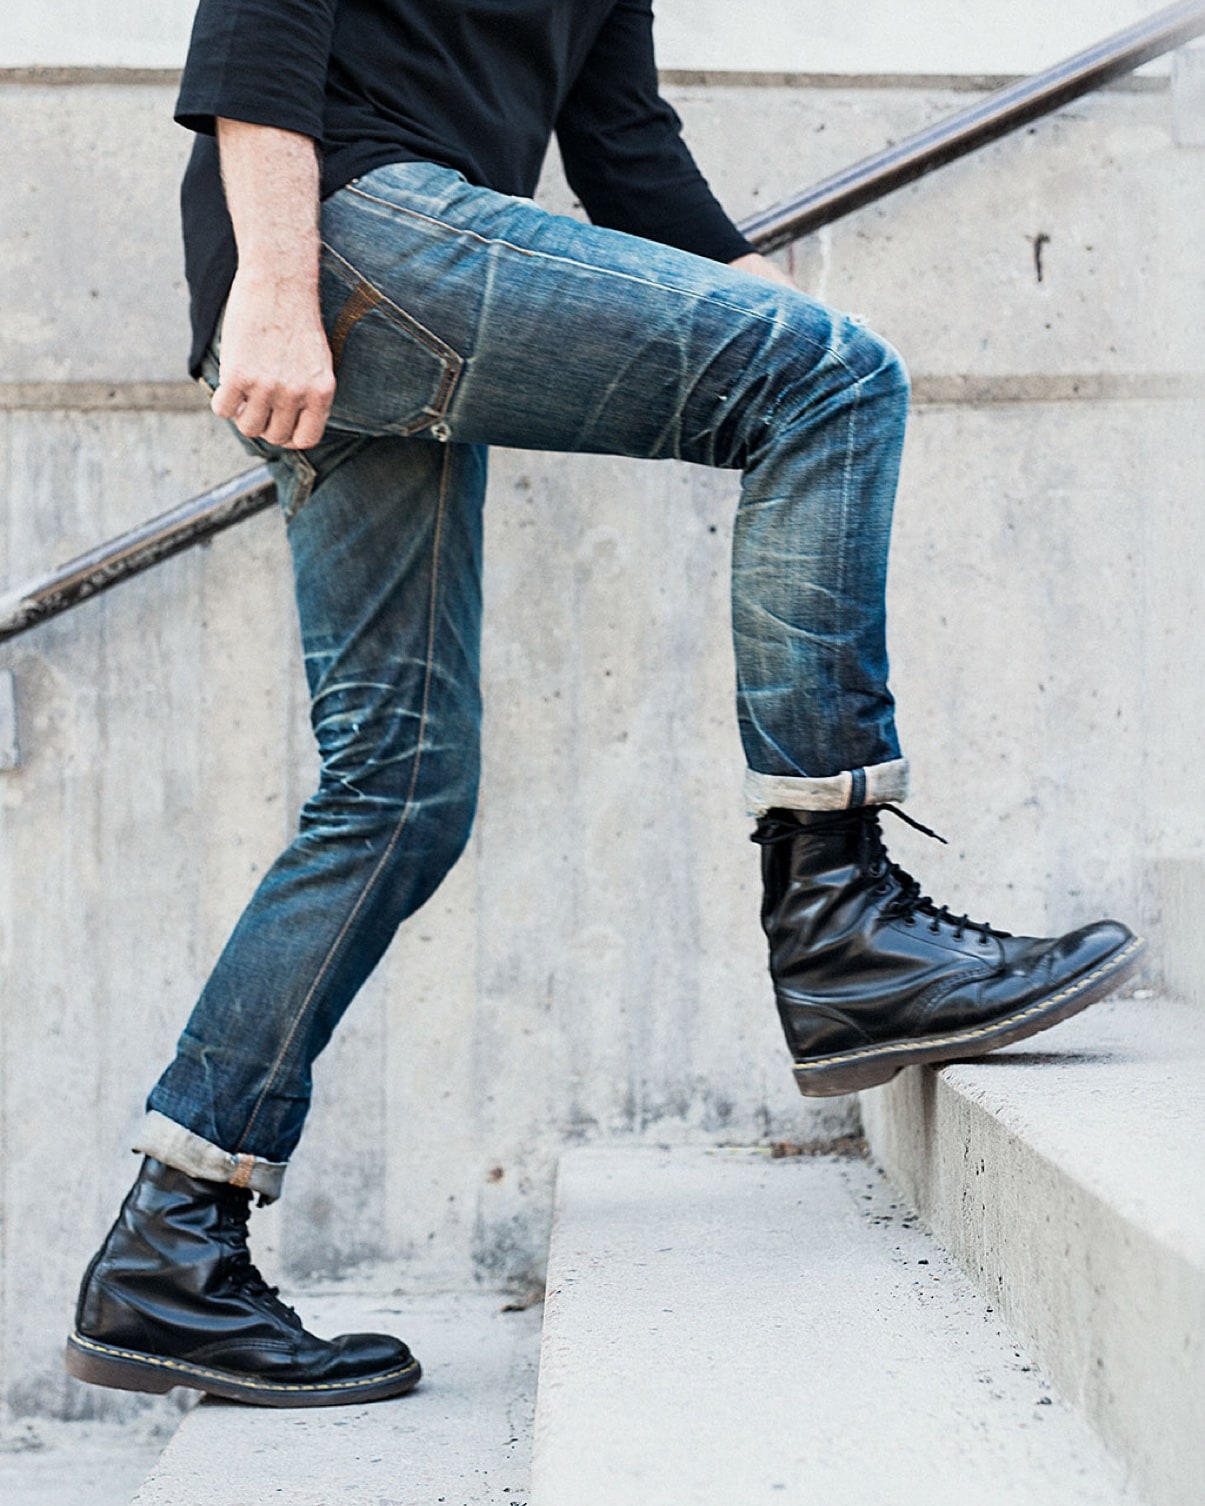 TINJ - It starts with a pair of drys – Nudie Jeans® | 100% Denim Collection | Site